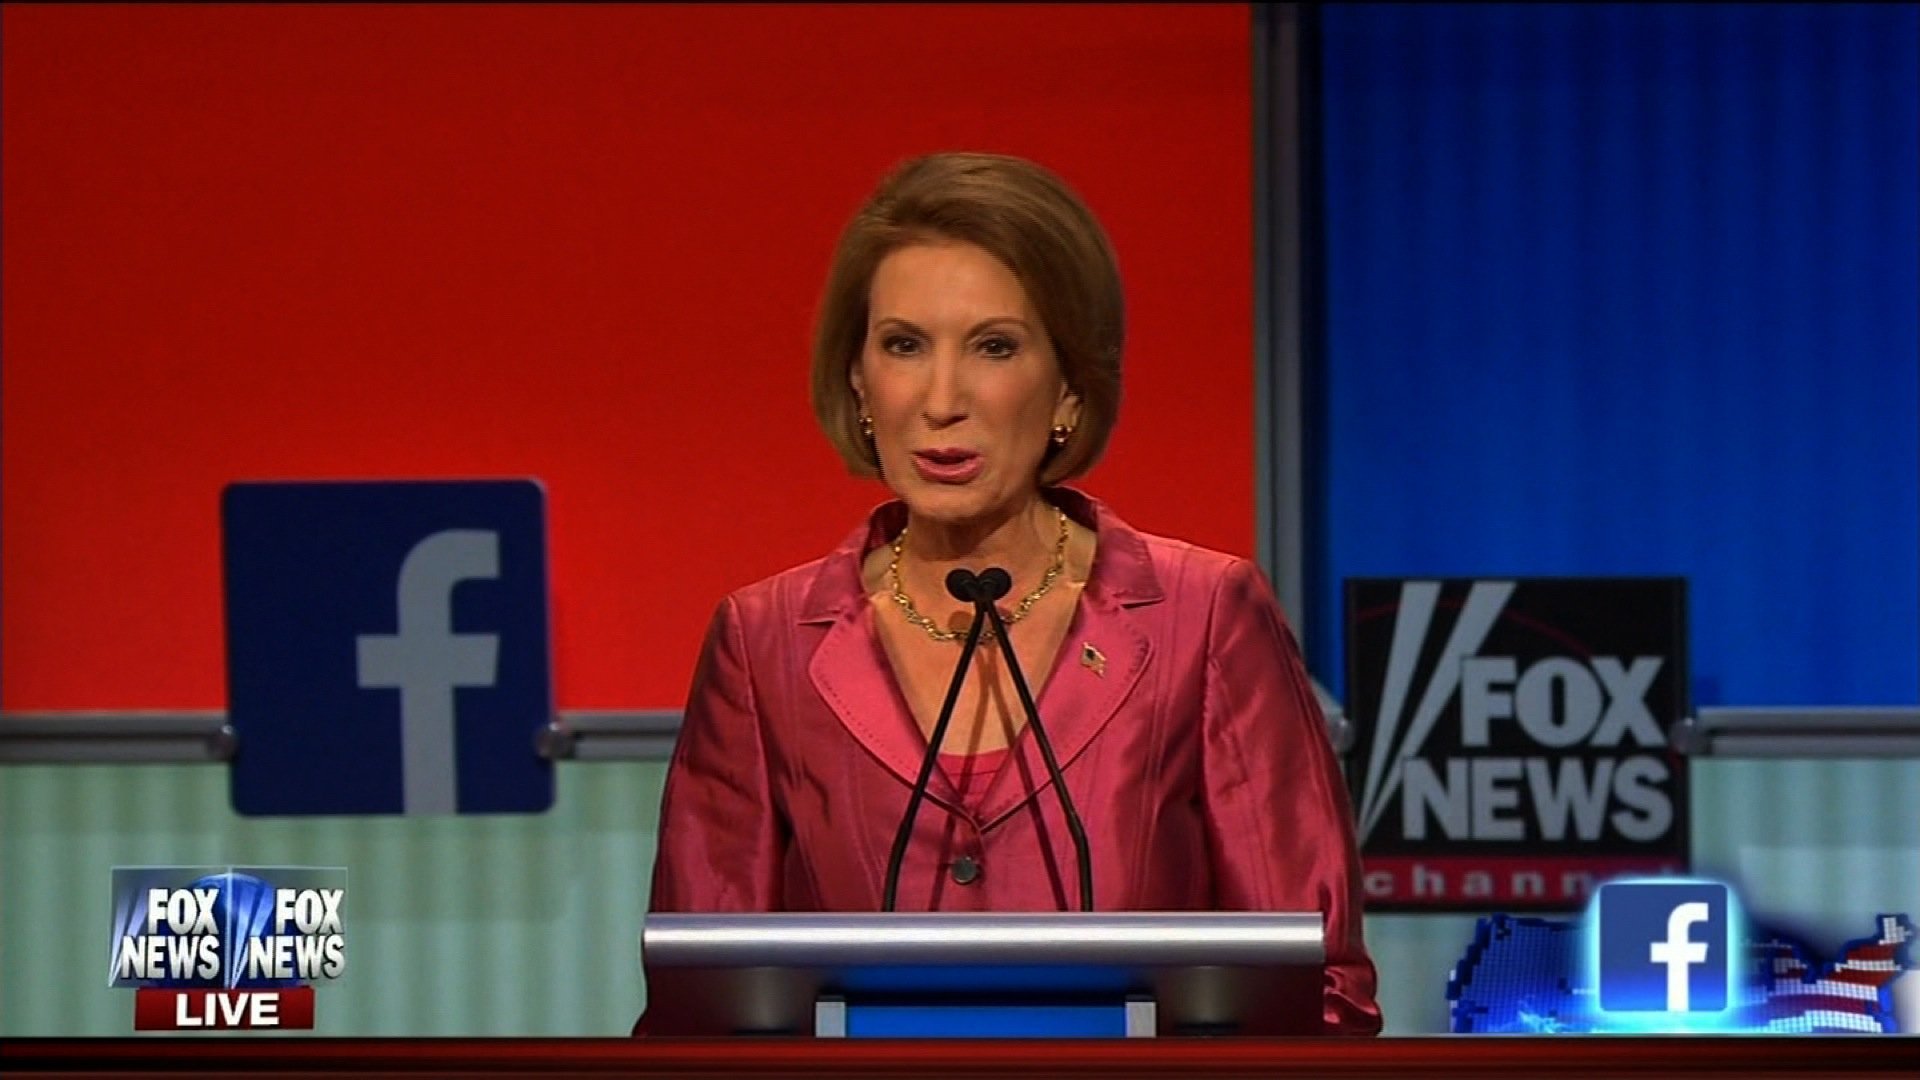 Carly Fiorina came out strong in the first Republican presidential debate on Thursday night, landing multiple zingers on her opponents on stage and in the broader field. After the debate, the former Hewlett-Packard CEO was the top-searched candidate on Google in more states than any of the other six early debate candidates.